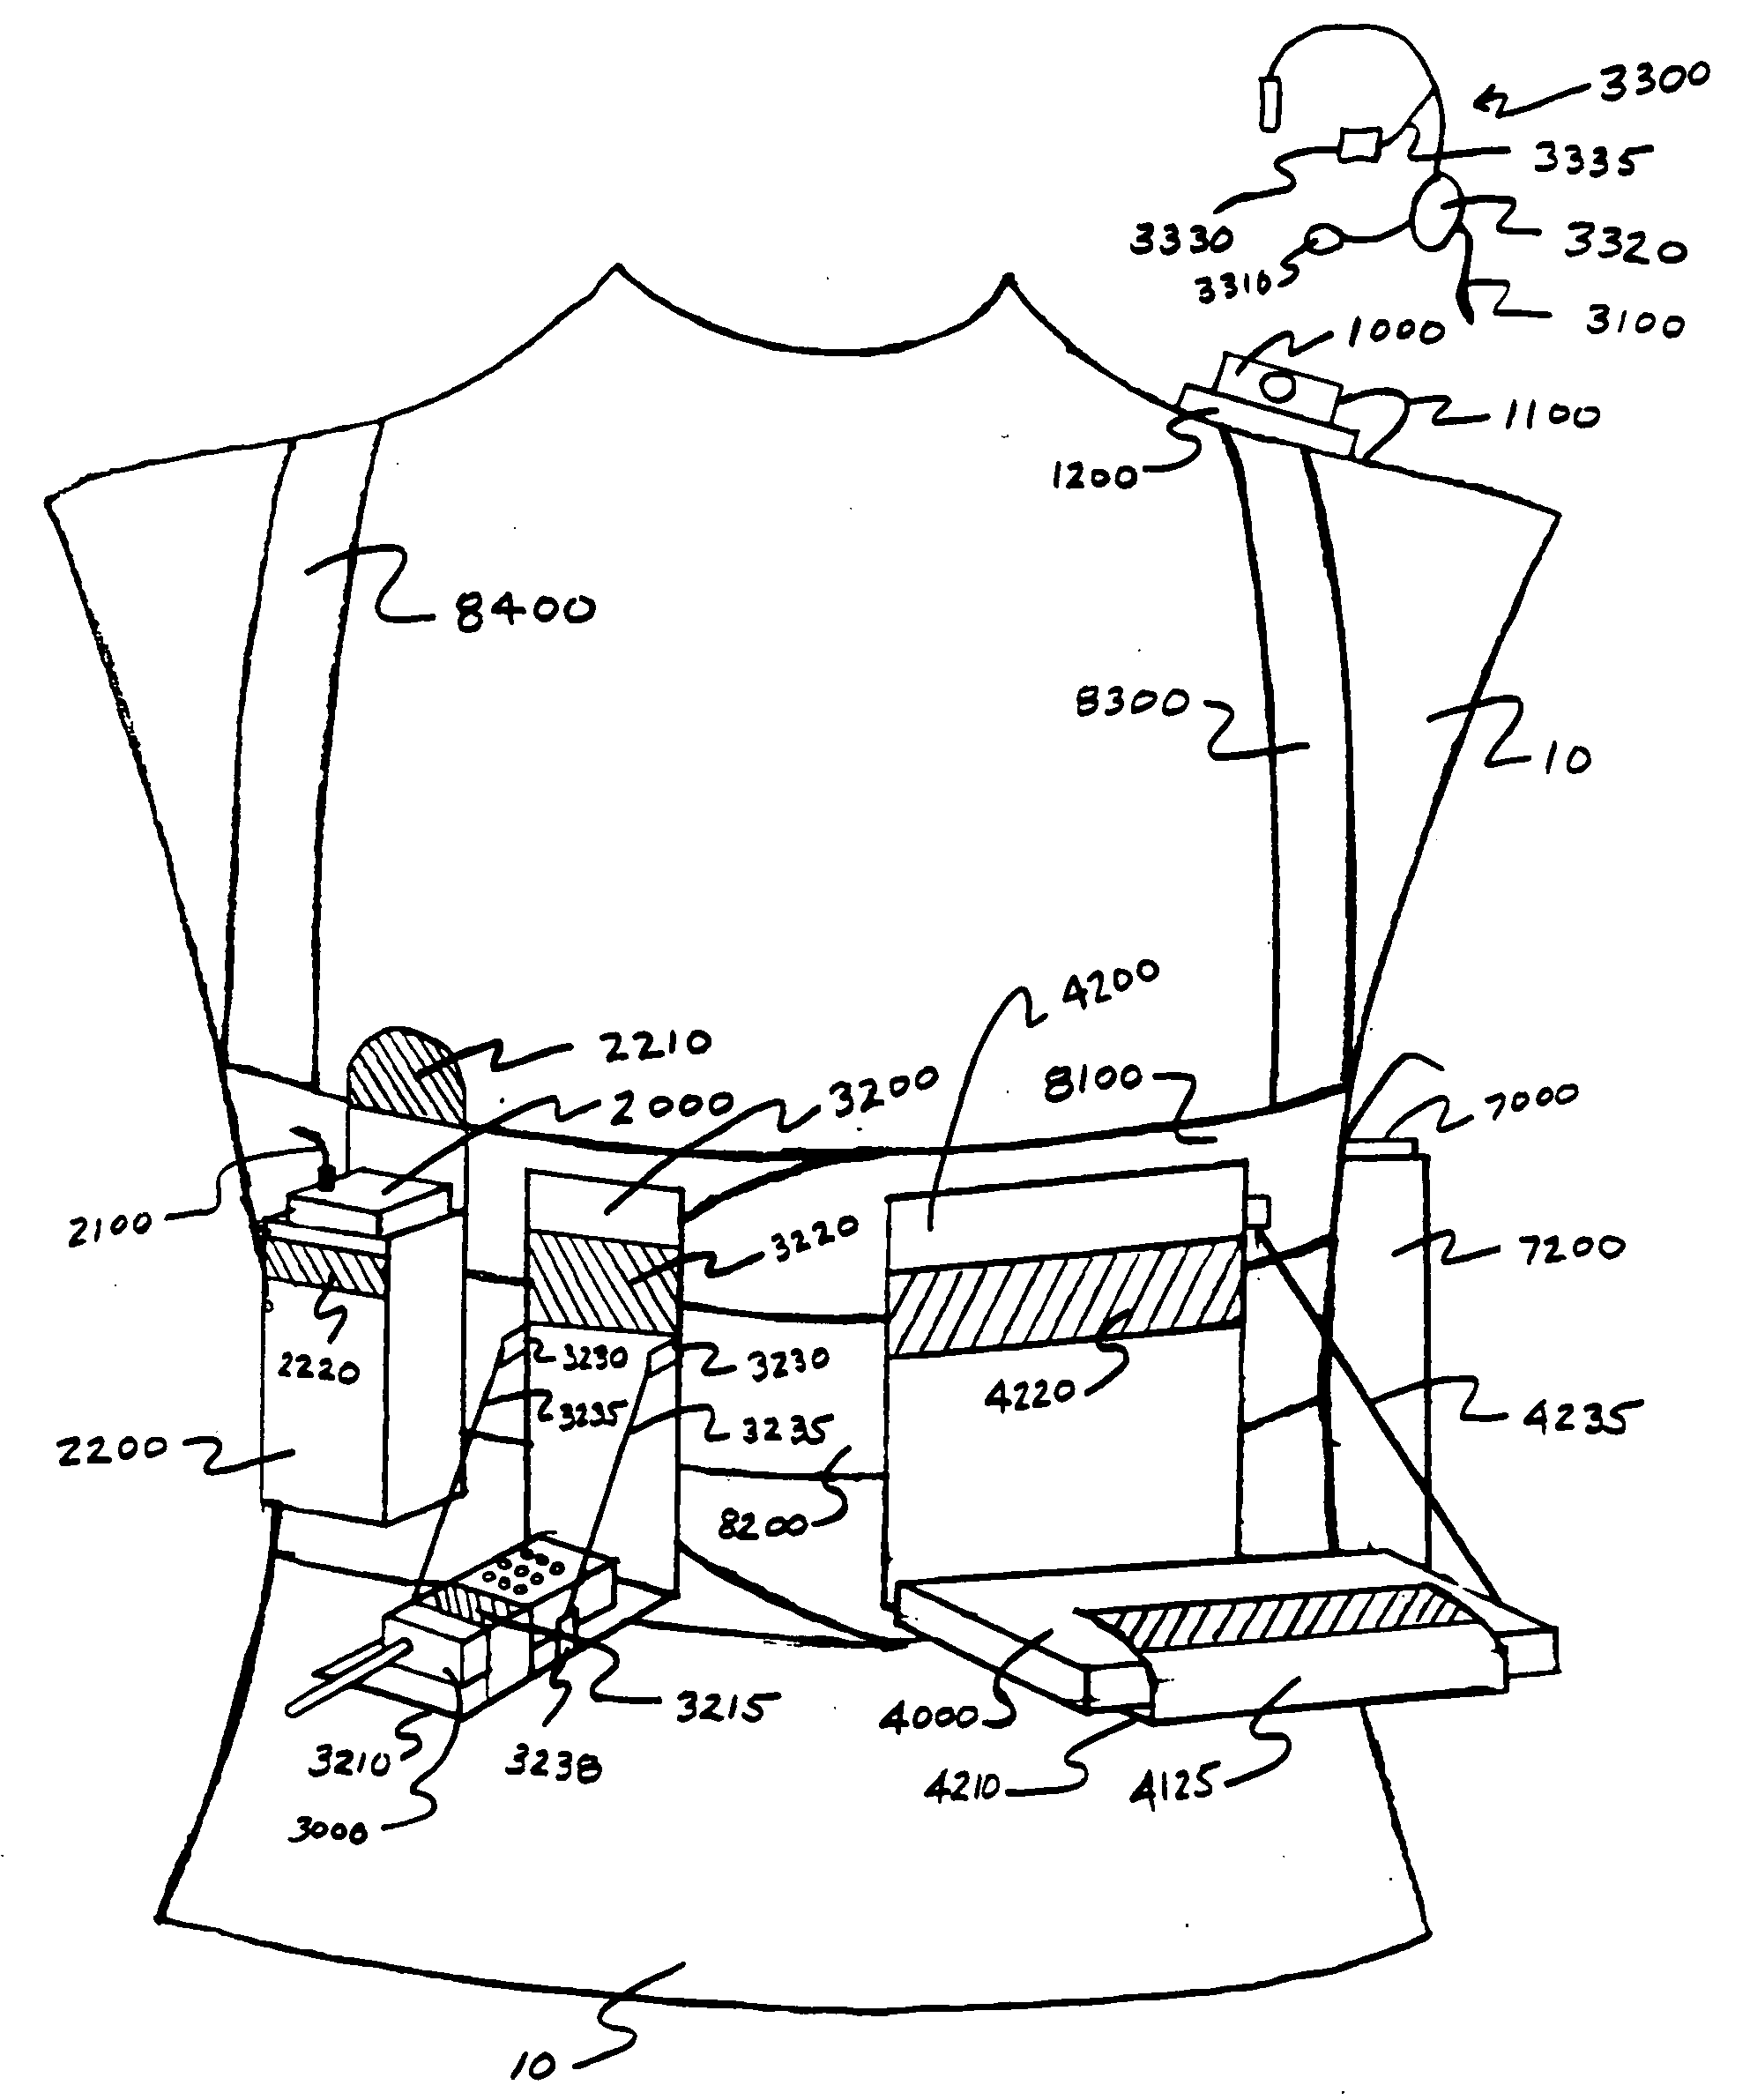 Apparatus and method for using a wearable computer in collaborative applications